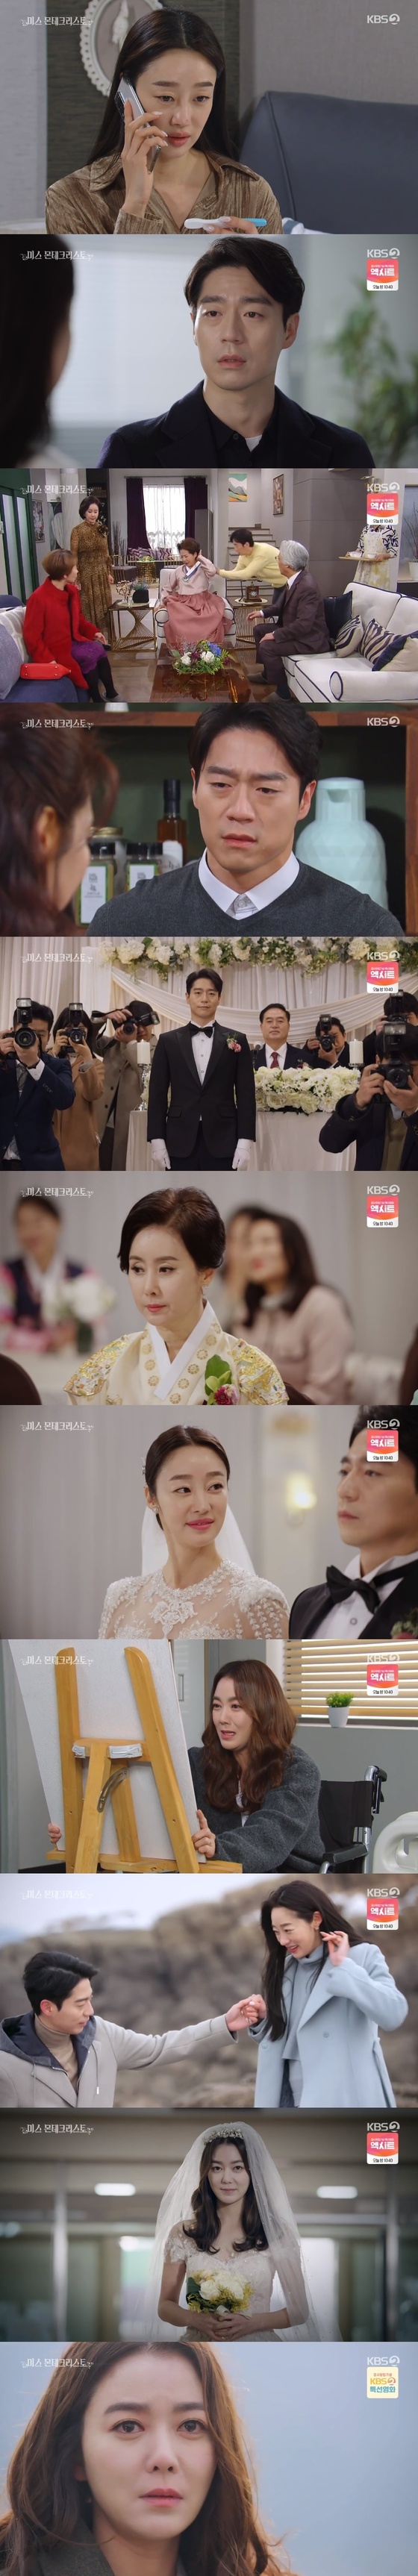 ‘Miss Montecristo’ married Choi Yeo-jin and Kyung Seong-hwan…  Lee So-yeon’s memories are back (total)